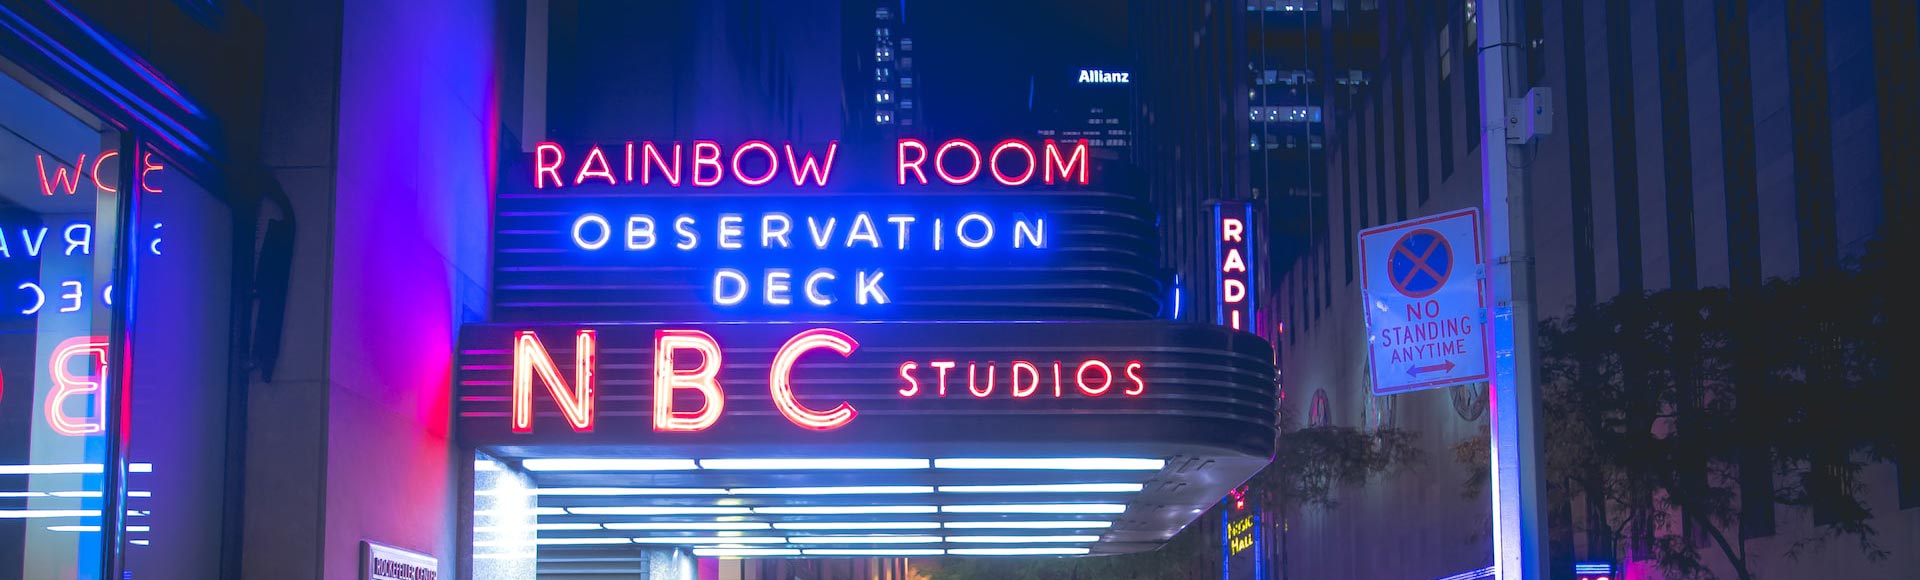 NBC Observation Deck neon sign at night